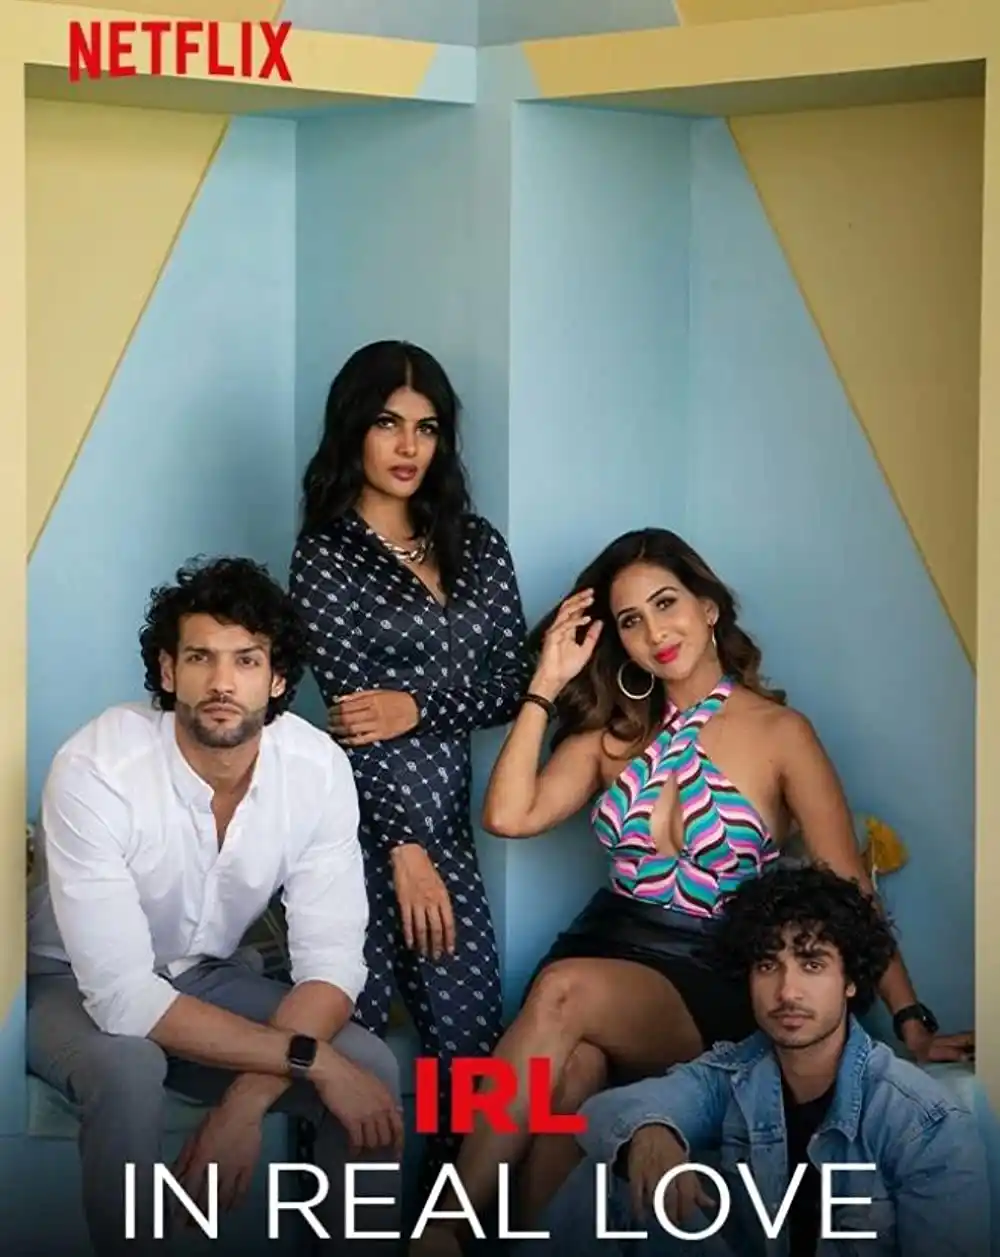 IRL: In Real Love Season 1 (Complete) Indian Series